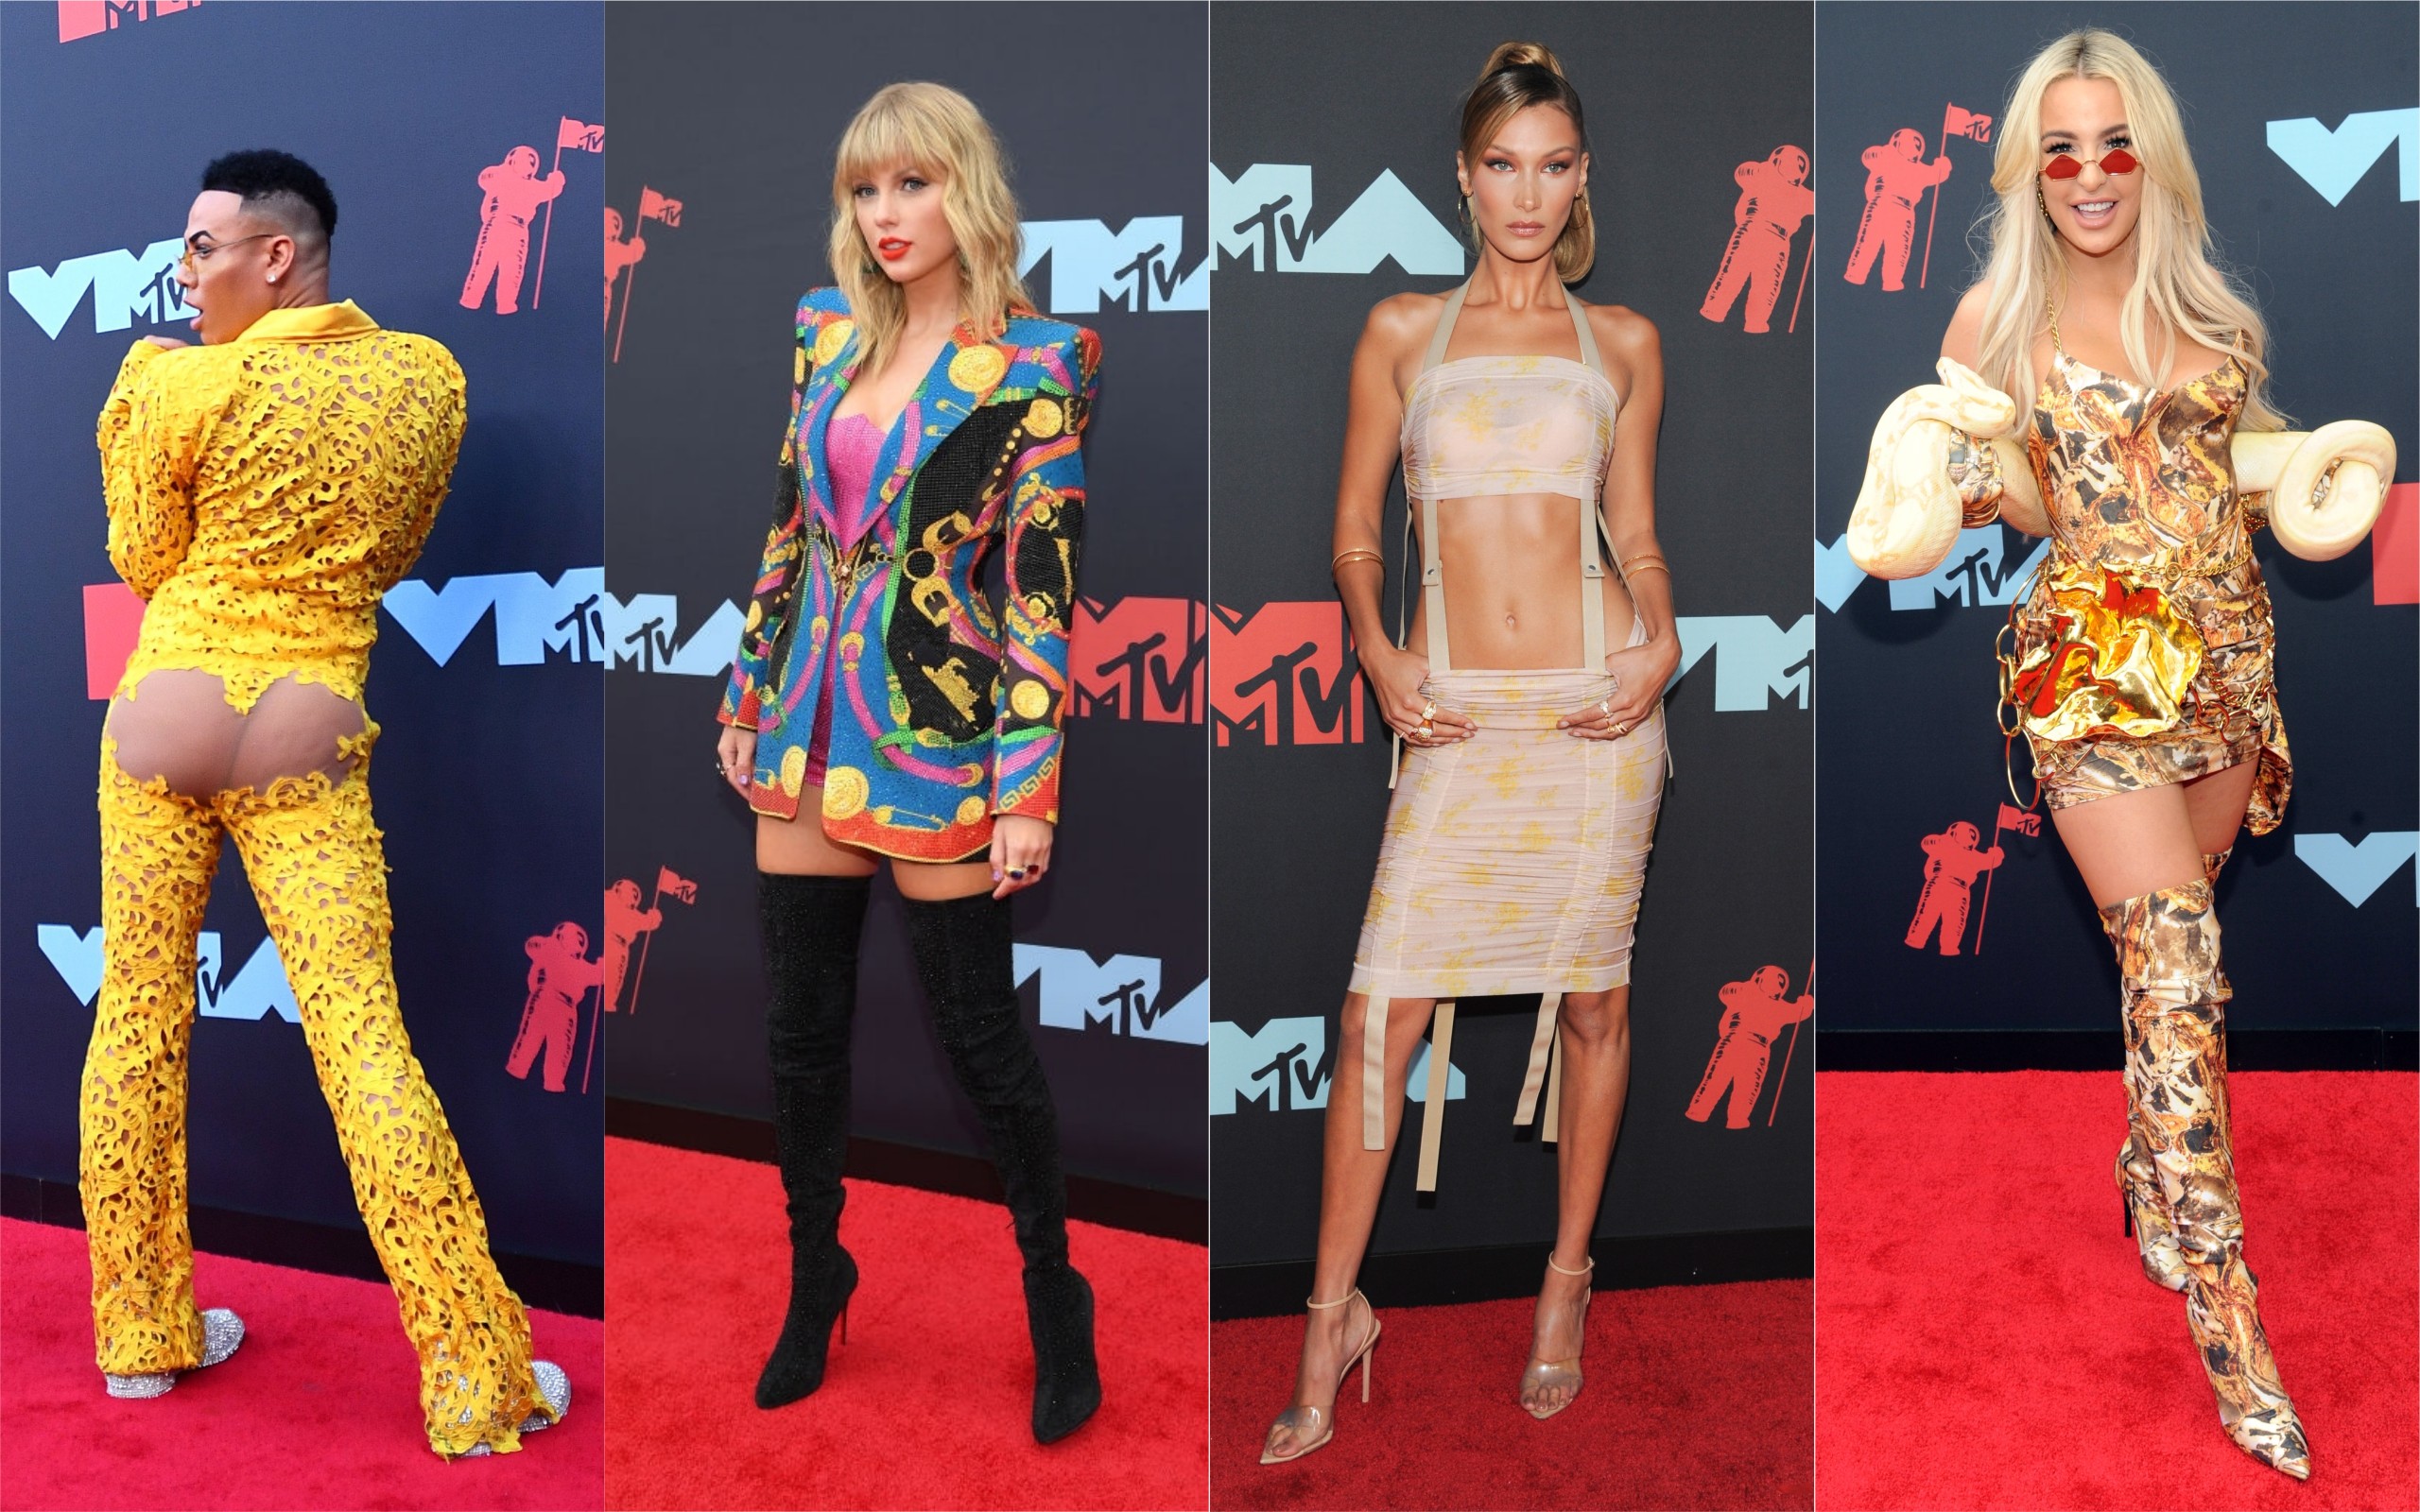 The Best And Worst Dressed Celebrities At The 2019 Mtv Video